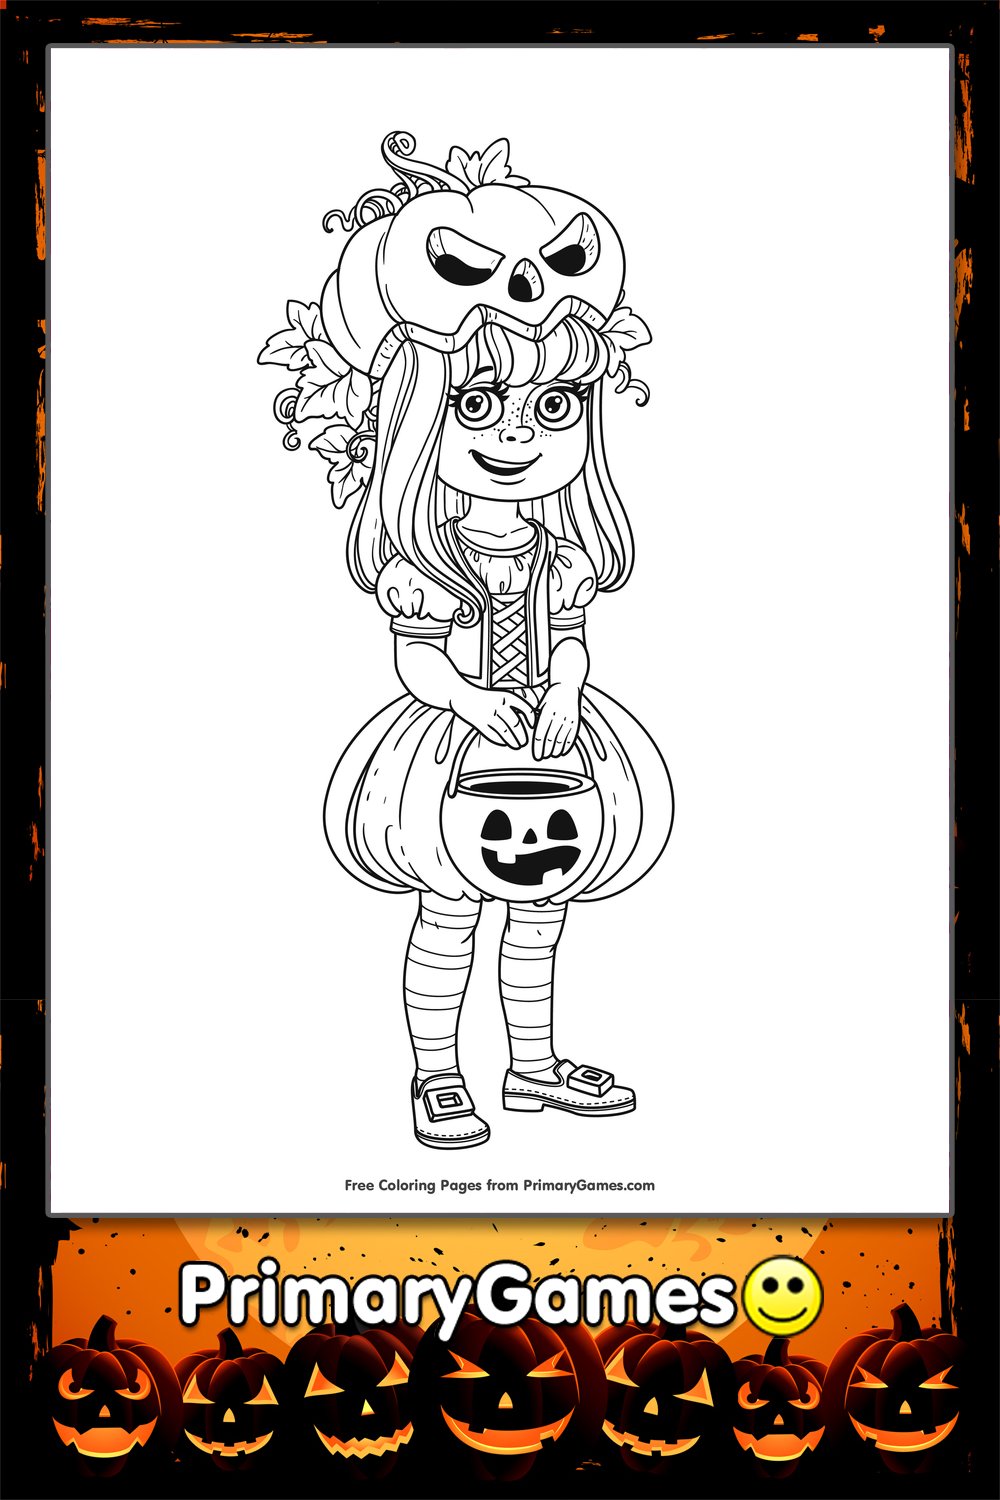 https://www.primarygames.com/holidays/halloween/coloringpages/pdf/pins/46-girl-in-pumpkin-costume.png